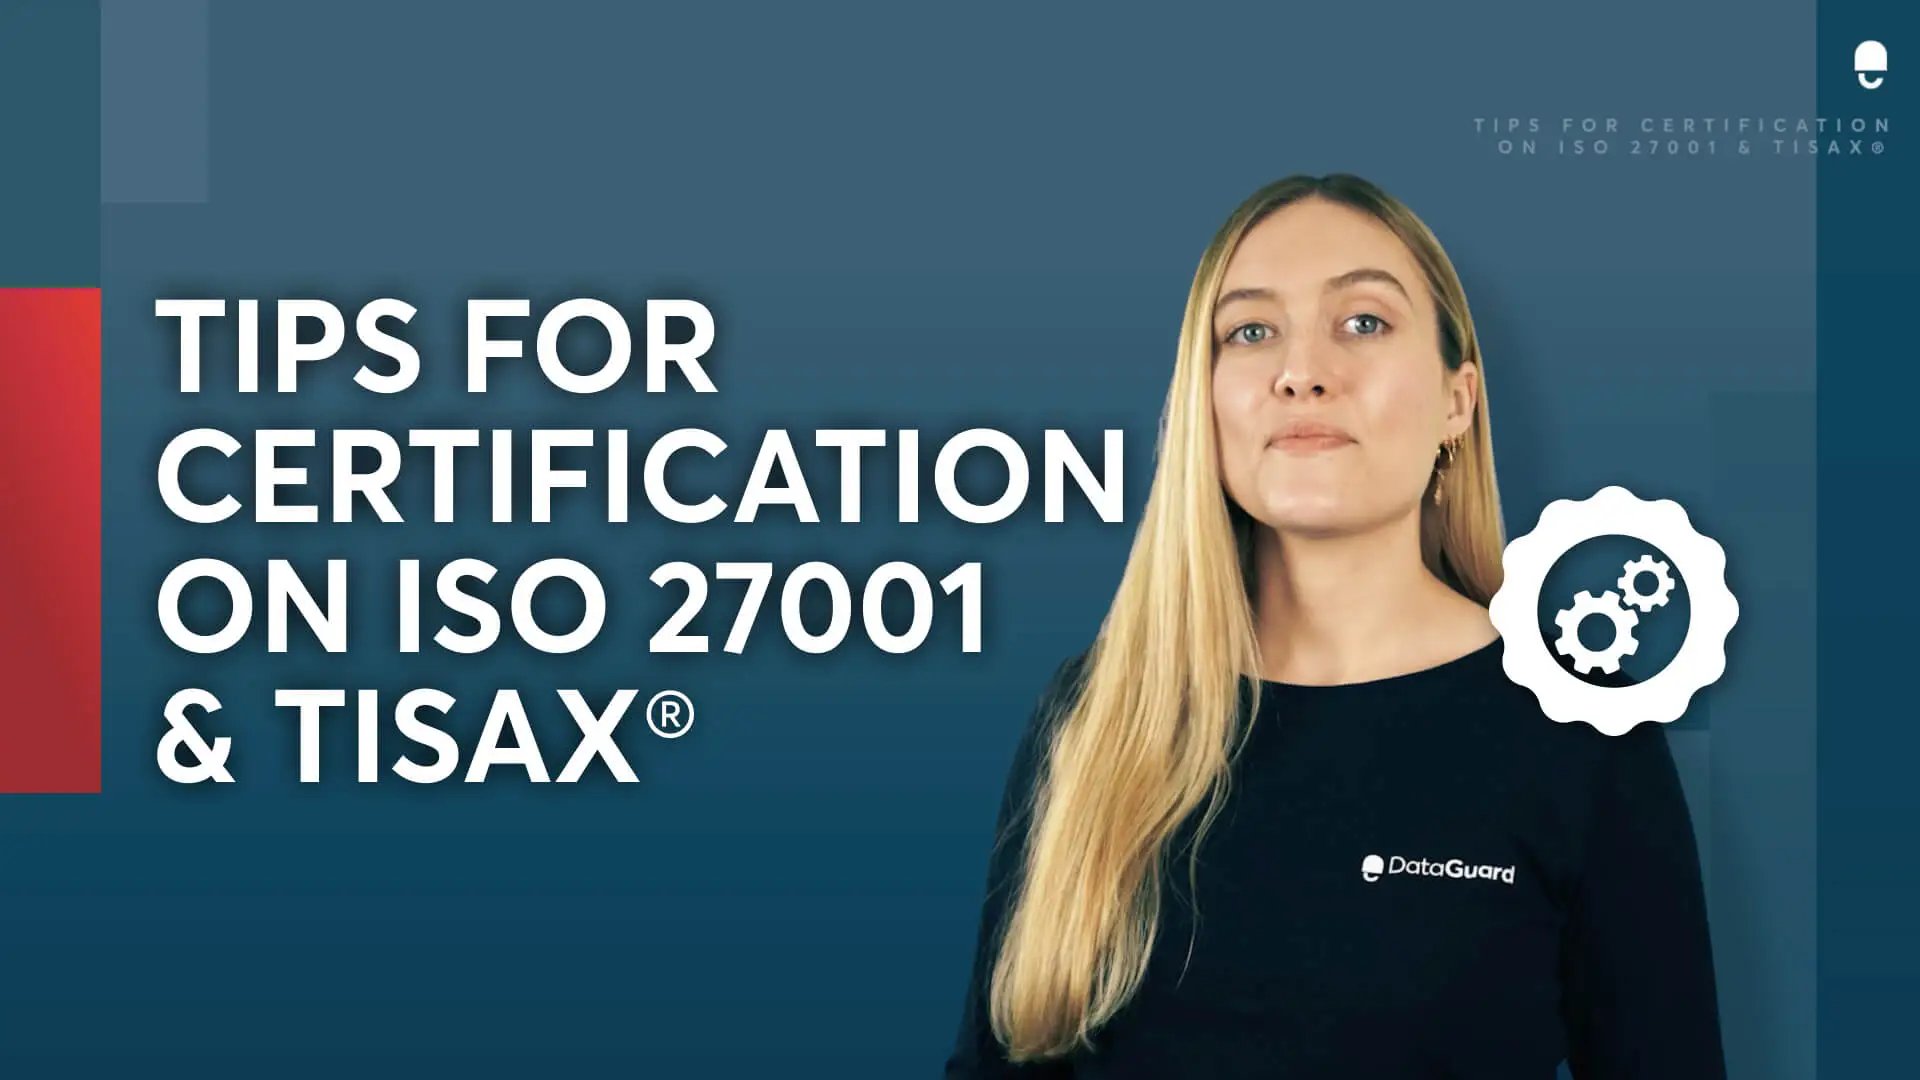 8-Tips-for-certification-on-ISo-27001-_-TISAX®_THUMB